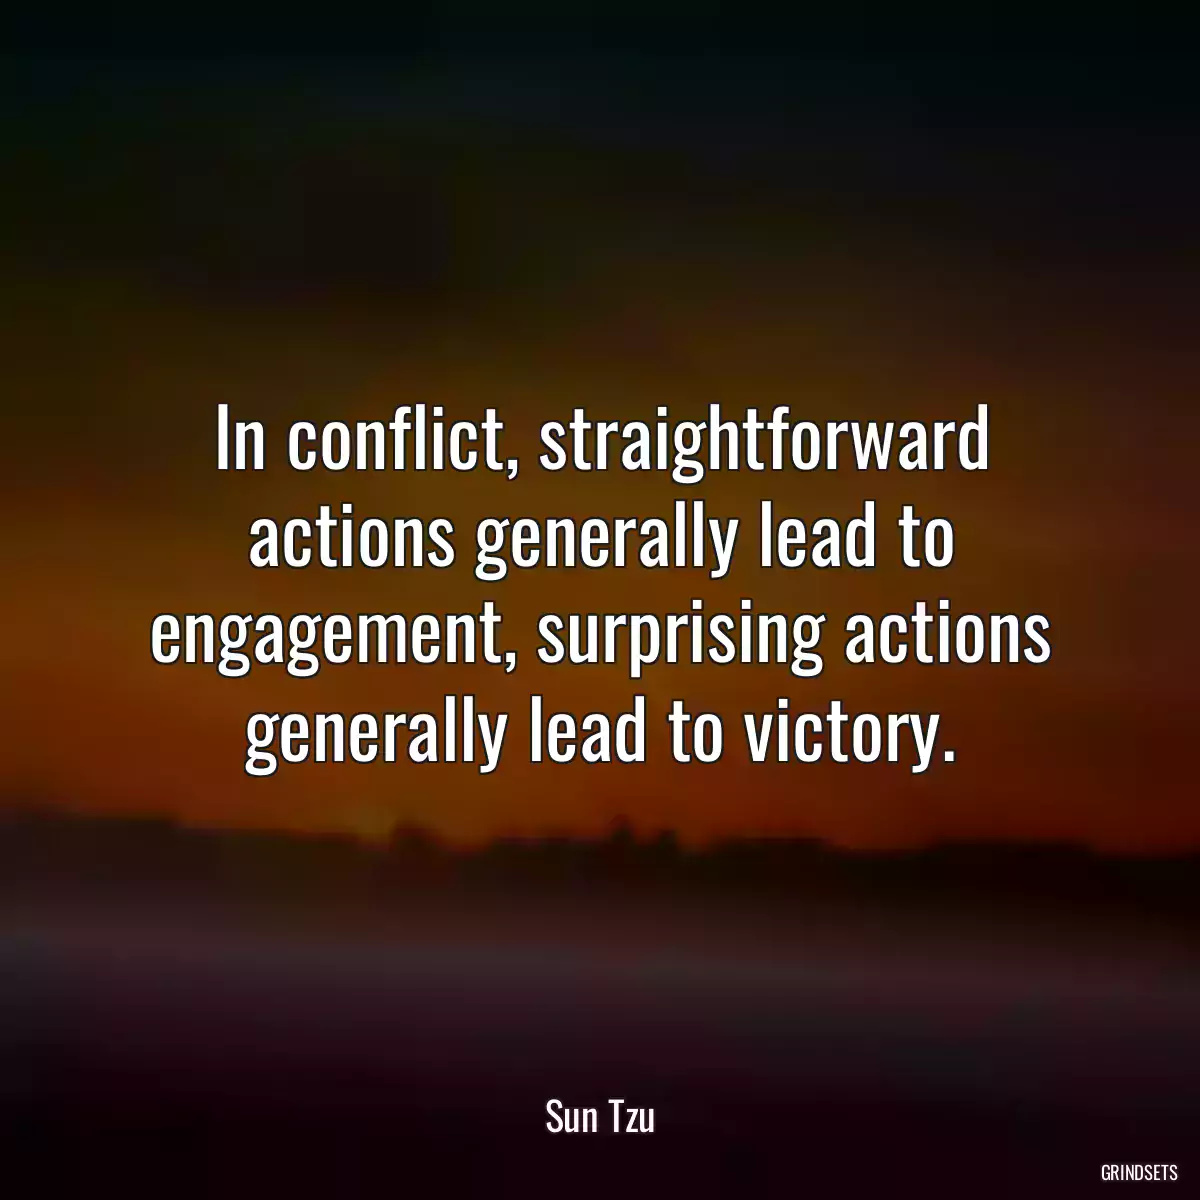 In conflict, straightforward actions generally lead to engagement, surprising actions generally lead to victory.